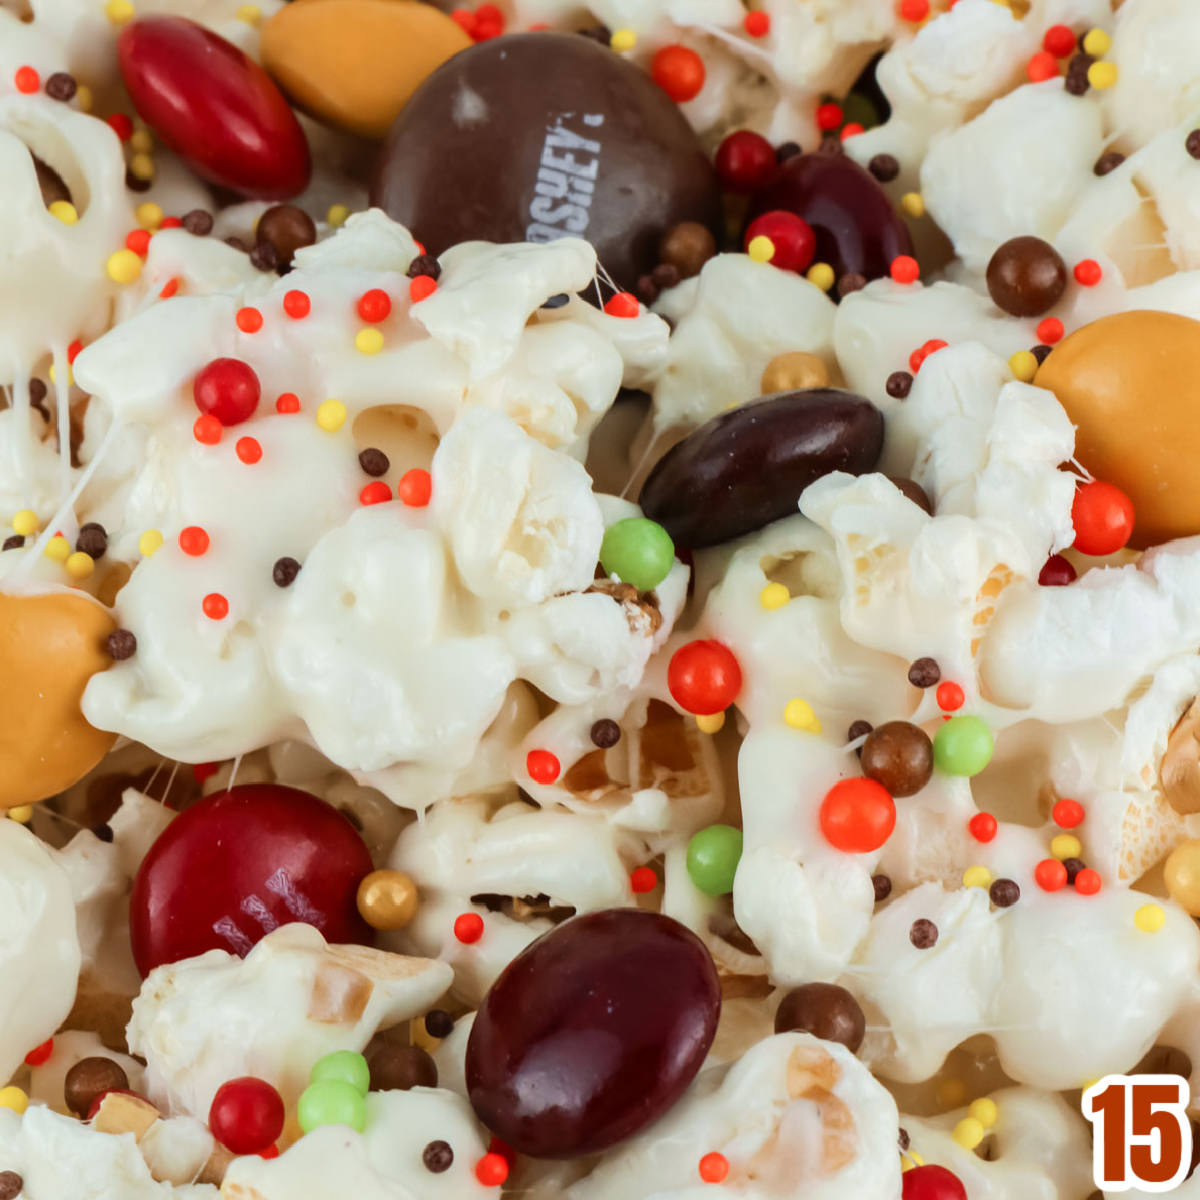 Extreme closeup on a bowl of Fall Harvest Popcorn.